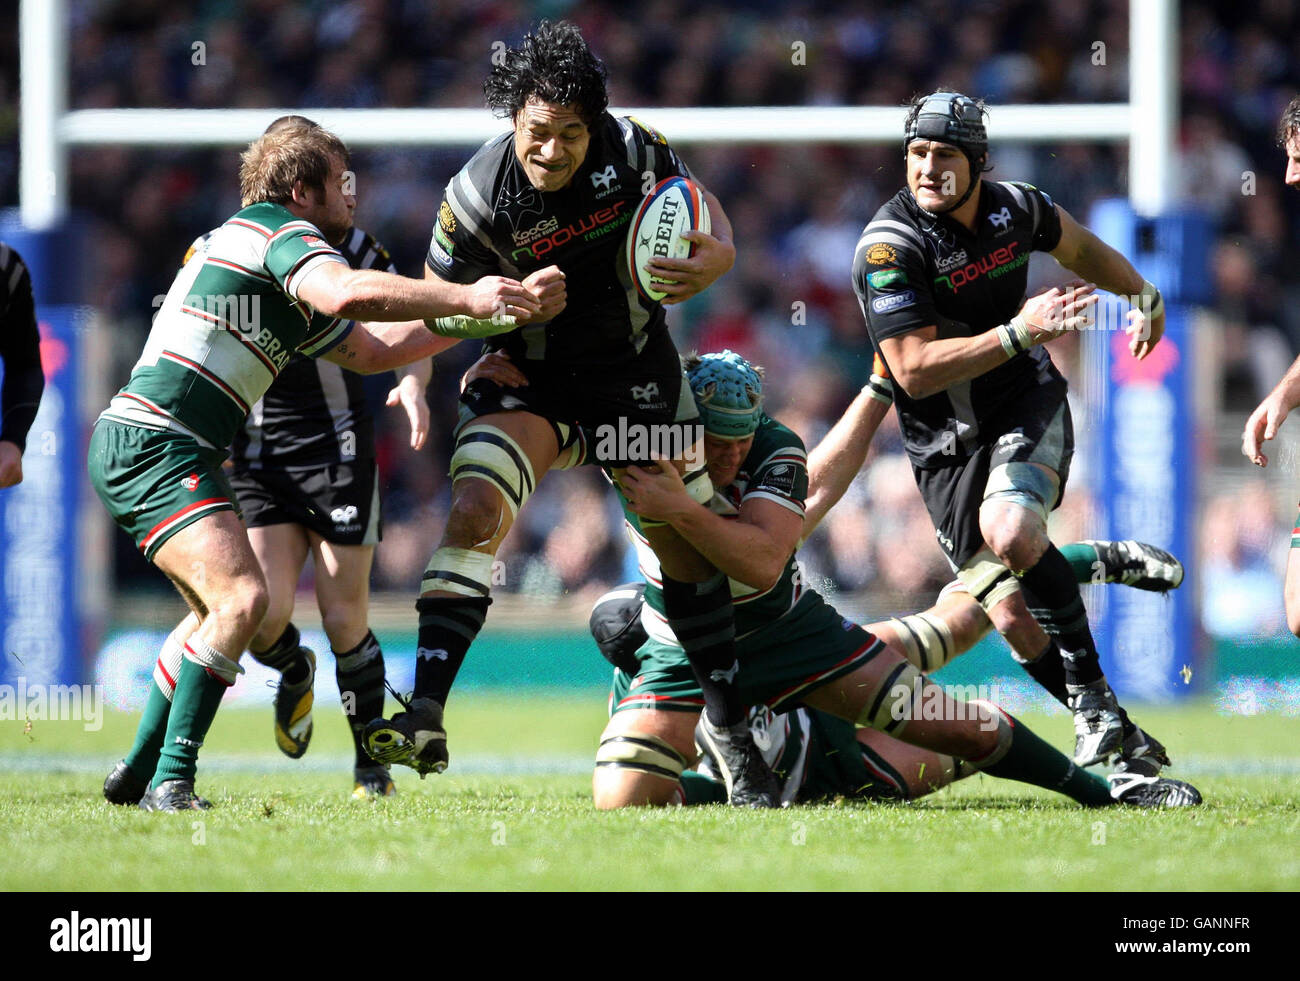 Ospreys' Filo Tiatia charges at Leicester Tigers Martin Castrogiovanni and Jordan Crane during EDF Energy Cup Final match at Twickenham, London. Stock Photo